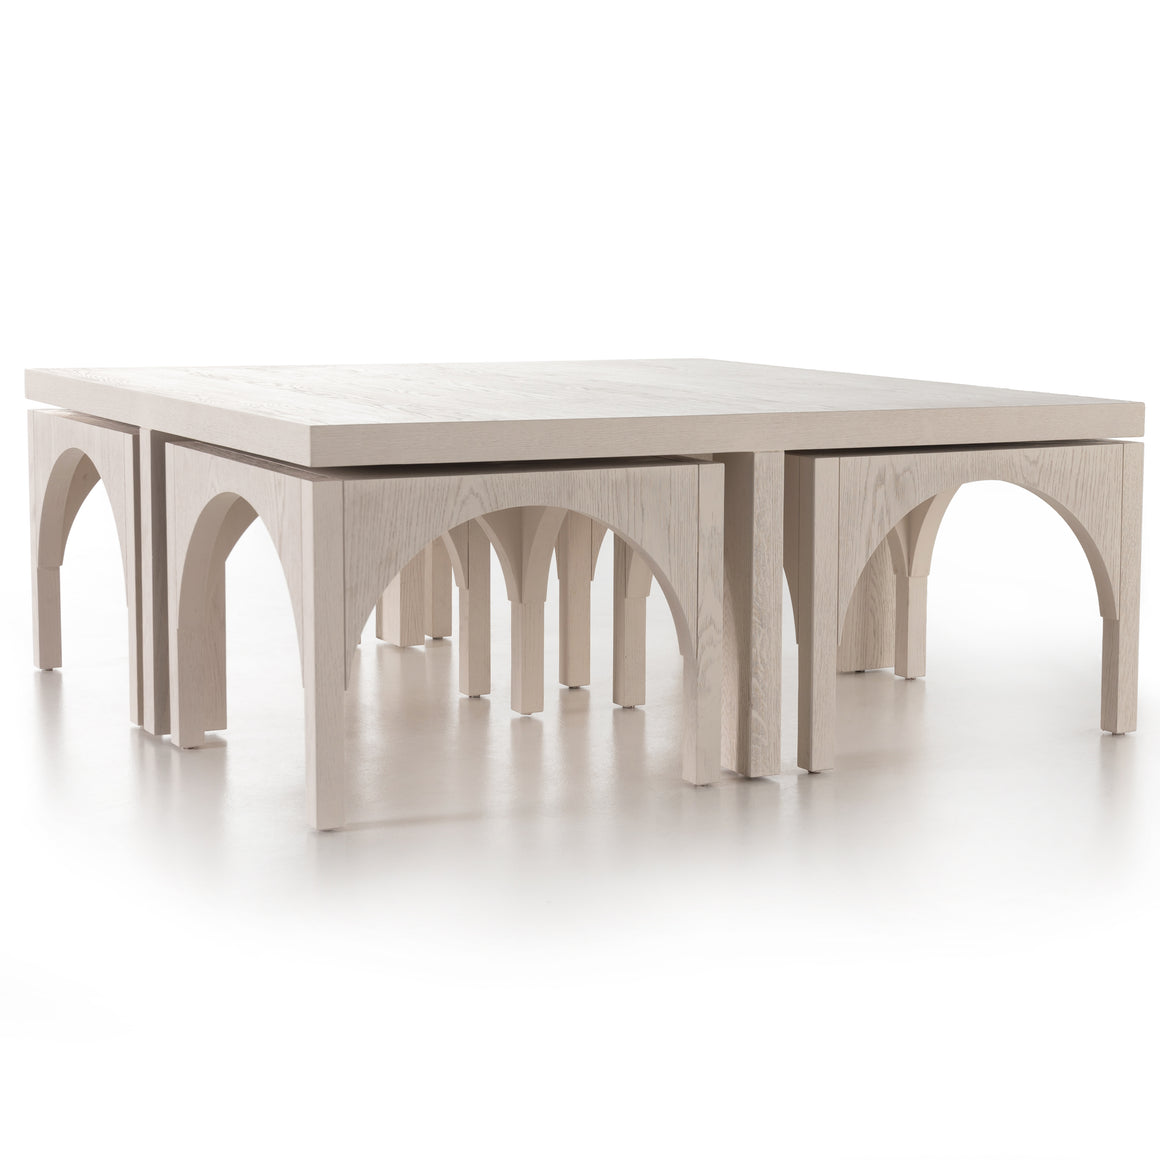 AMARA COFFEE TABLE WITH NESTING ARCH - OFF WHITE OAK